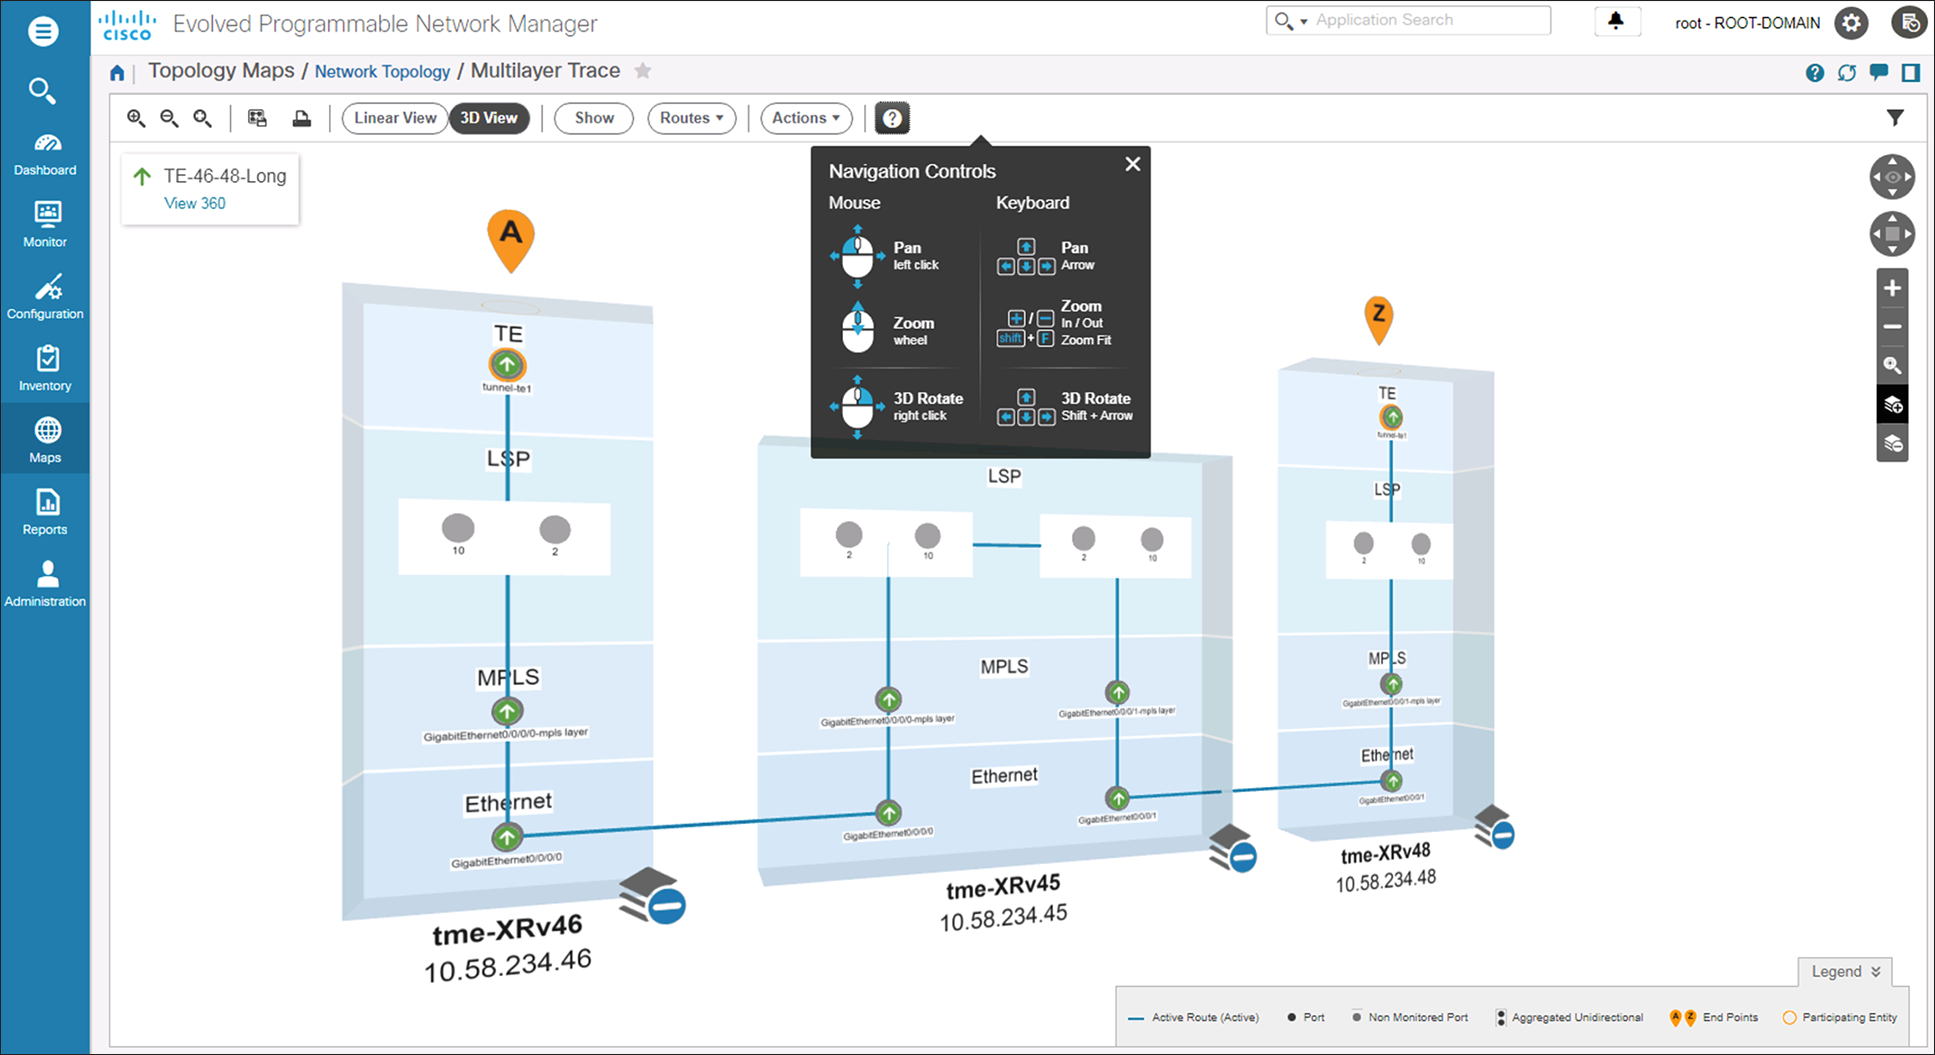 Cisco EPN Manager multilayer trace capabilities